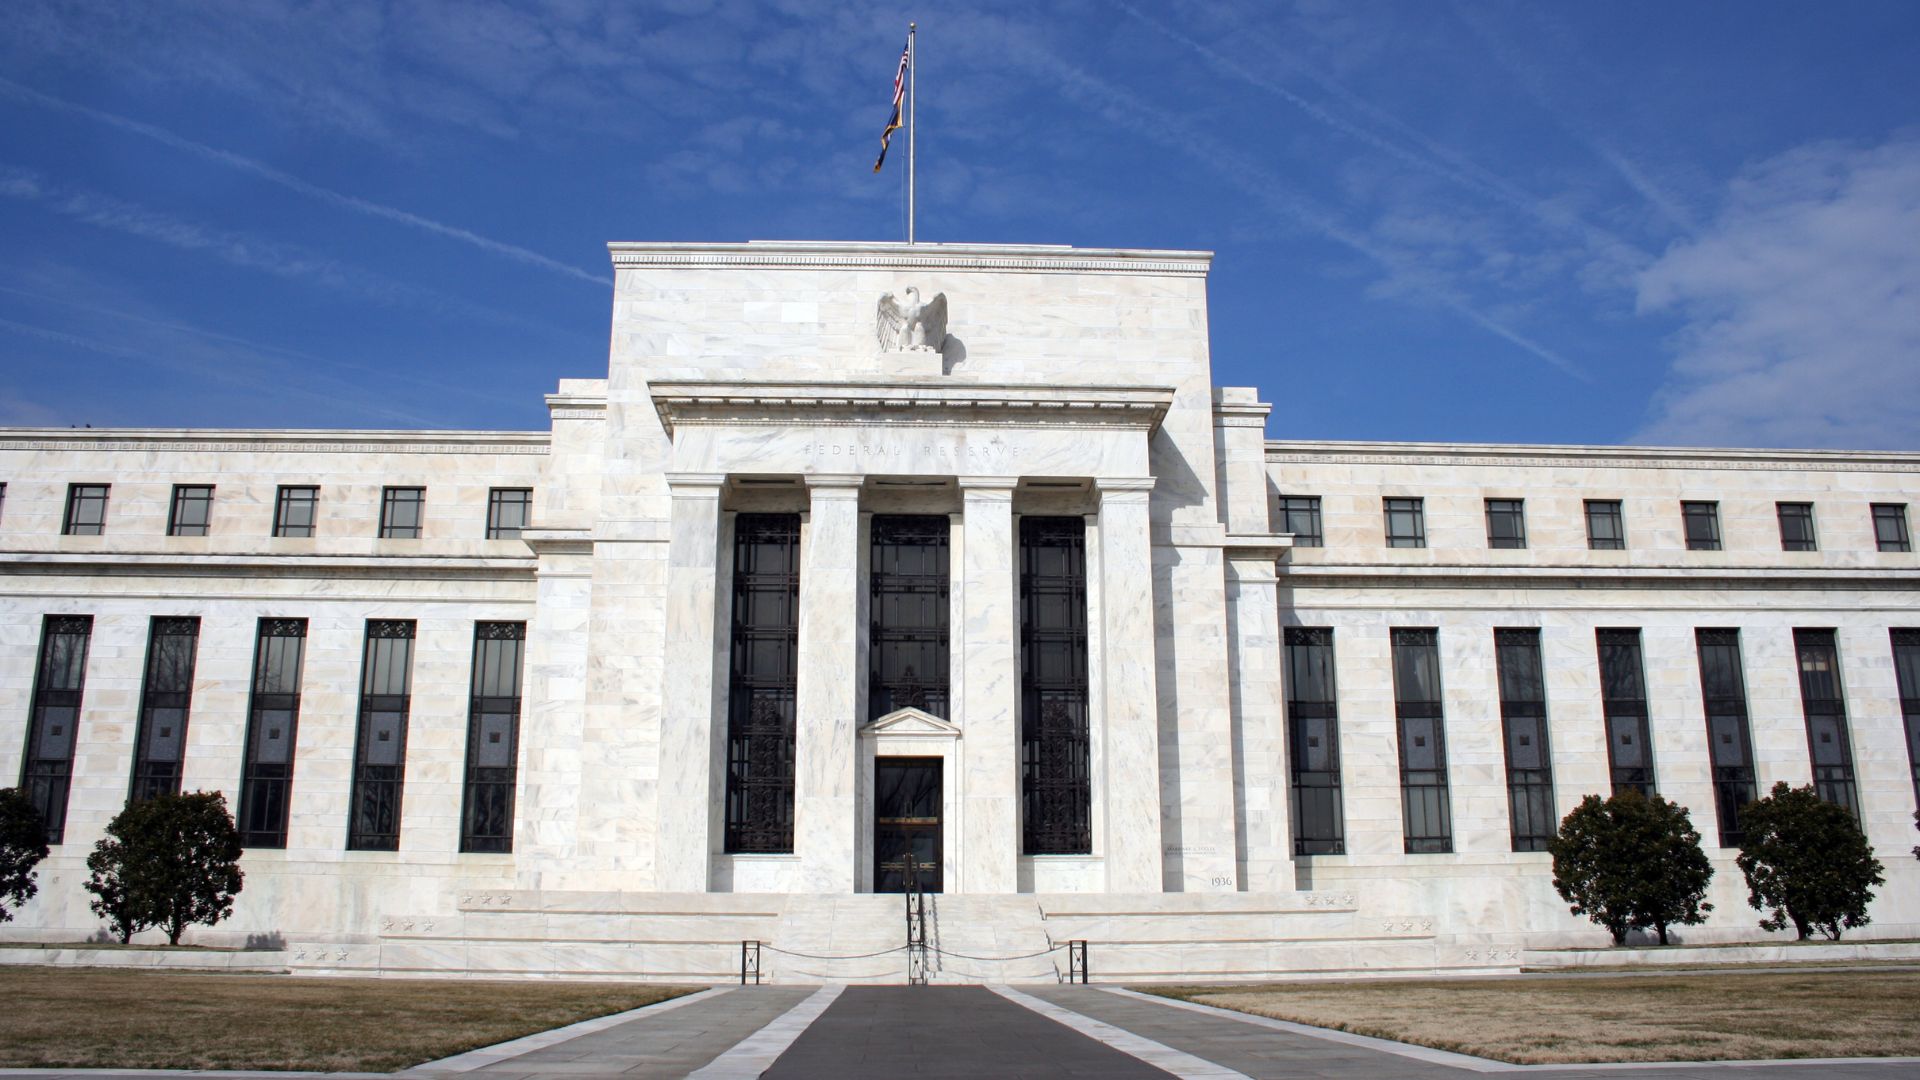 LATEST-FED-FINANCIAL-STABILITY-REPORT-HIGHLIGHTS-RISKS-BUT-SAYS-BANKS-HAVE-CAPITAL-TO-ABSORB-POTENTIAL-ECONOMIC-SHOCKS